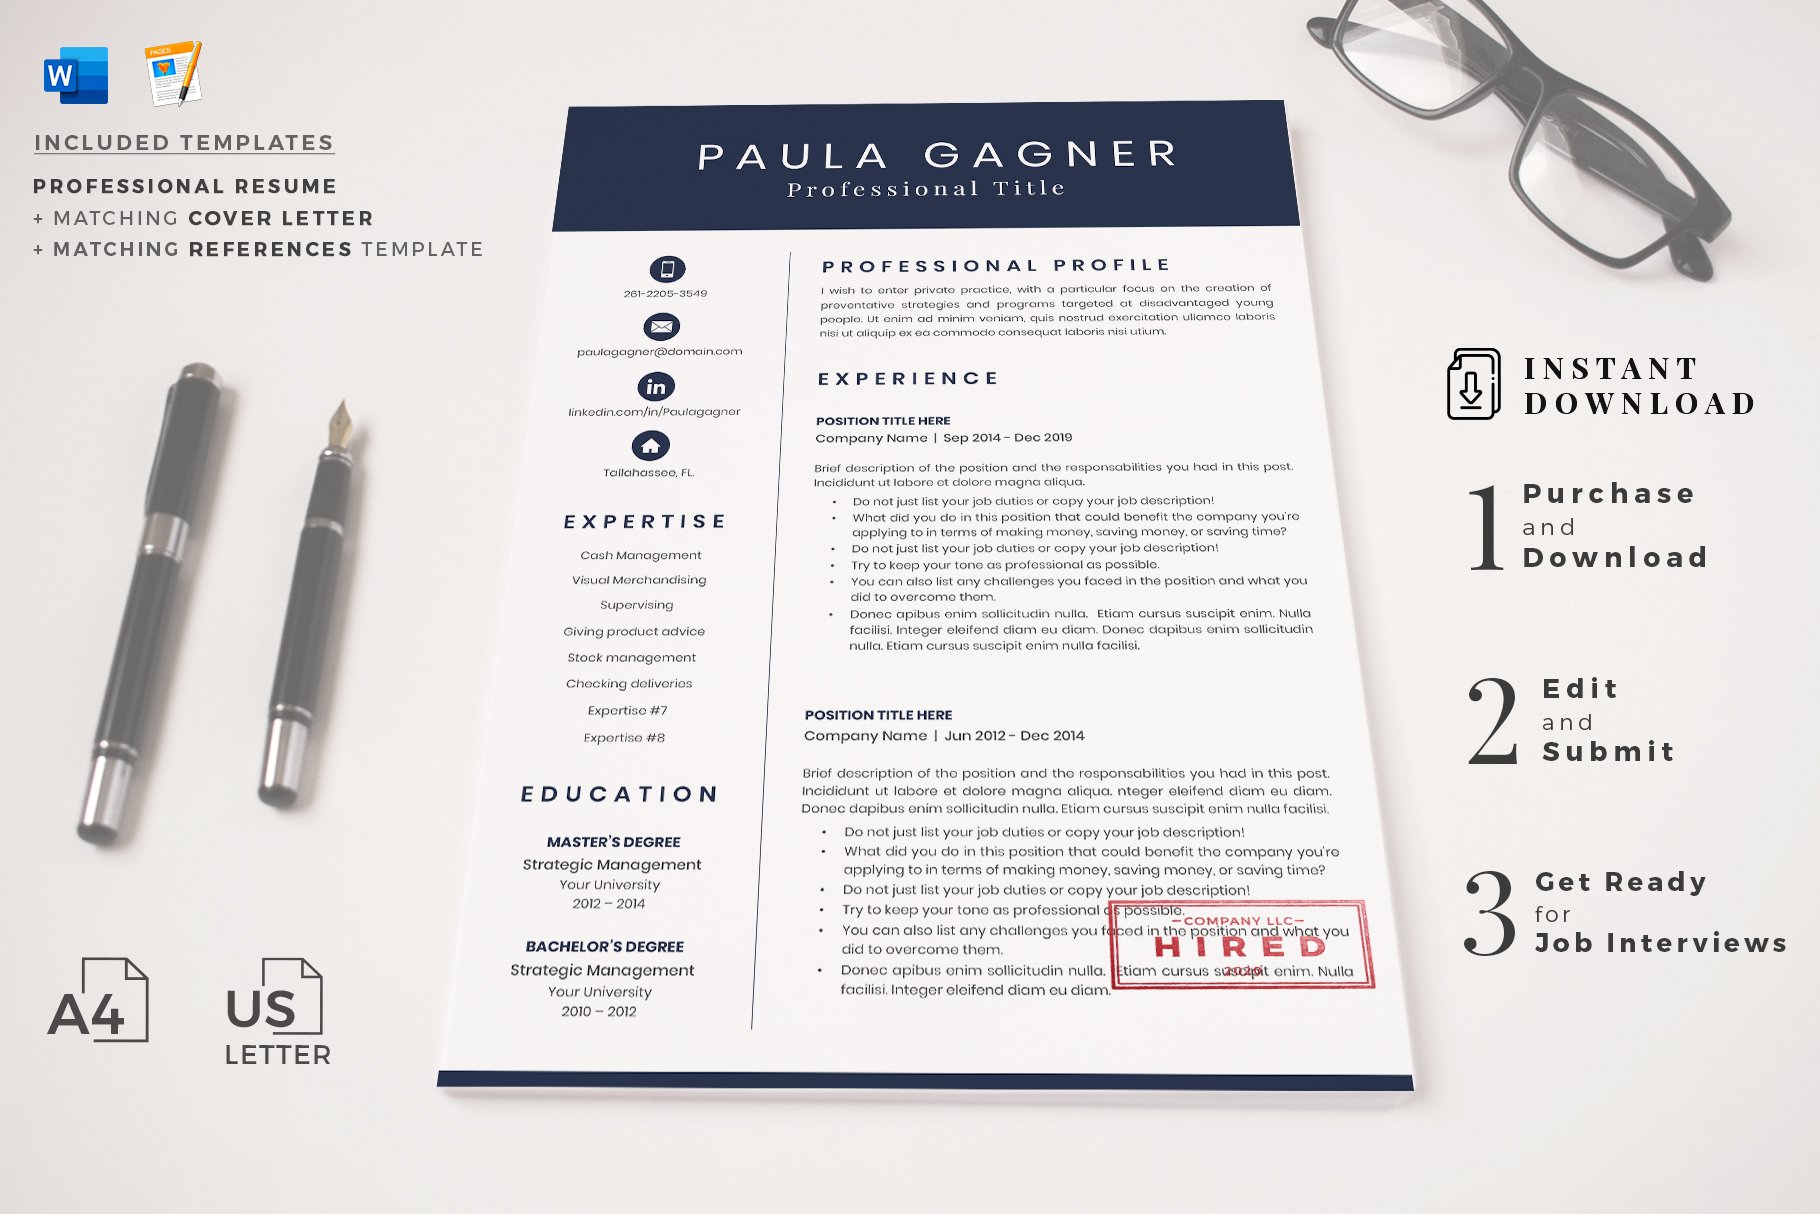 Blue and white resume with a pen and glasses.